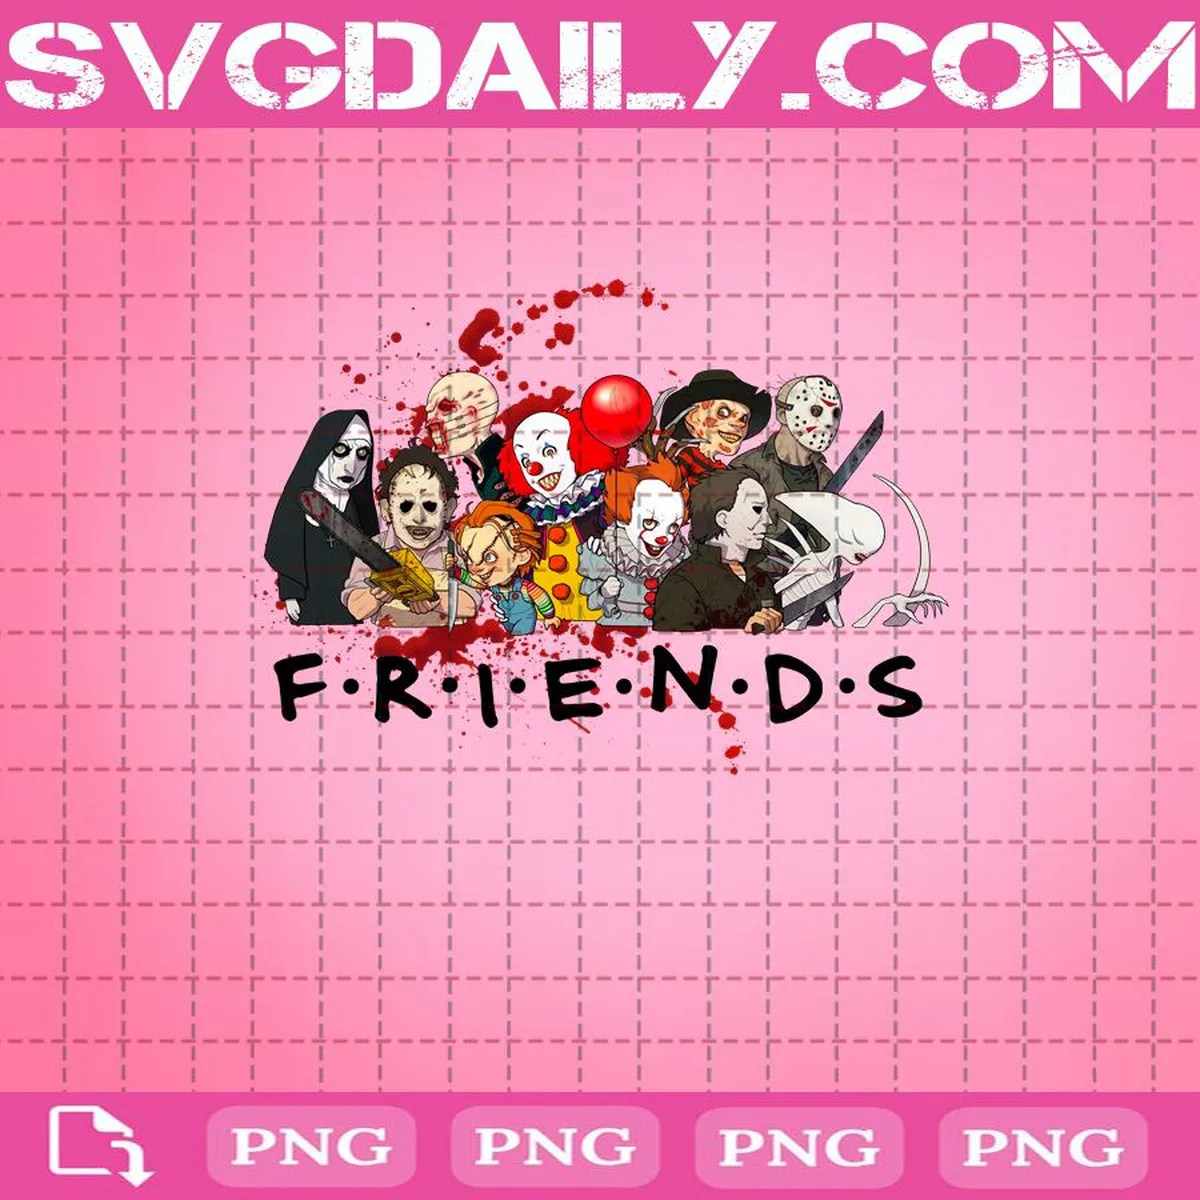 Halloween Friends Png, Friends Png, Horror Characters Friends Png, Horror Friends Png, Horror Movie Characters Png